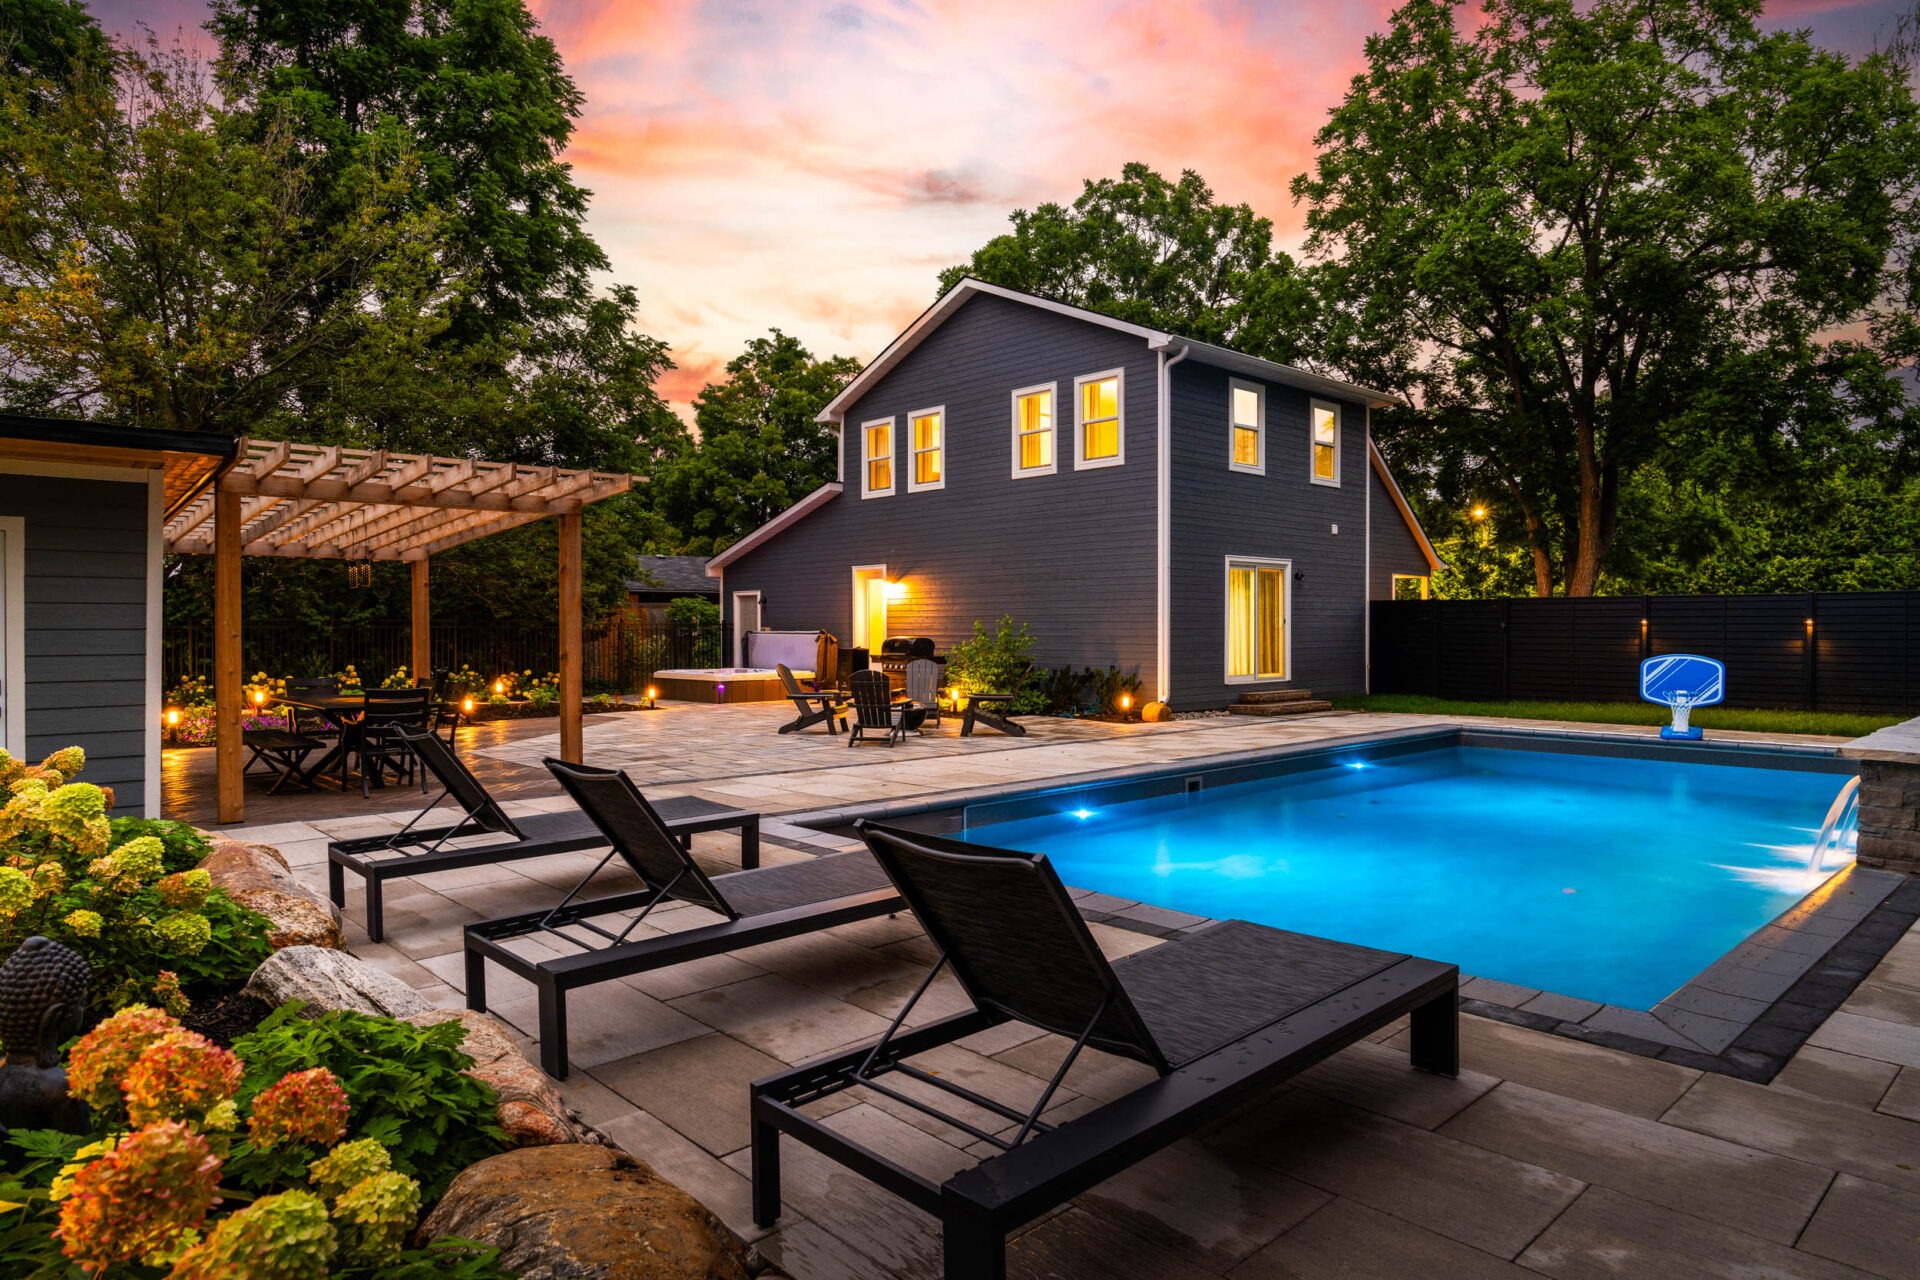 A twilight scene of a cozy backyard with an illuminated swimming pool, lounging chairs, a pergola, and a two-story house with glowing windows.